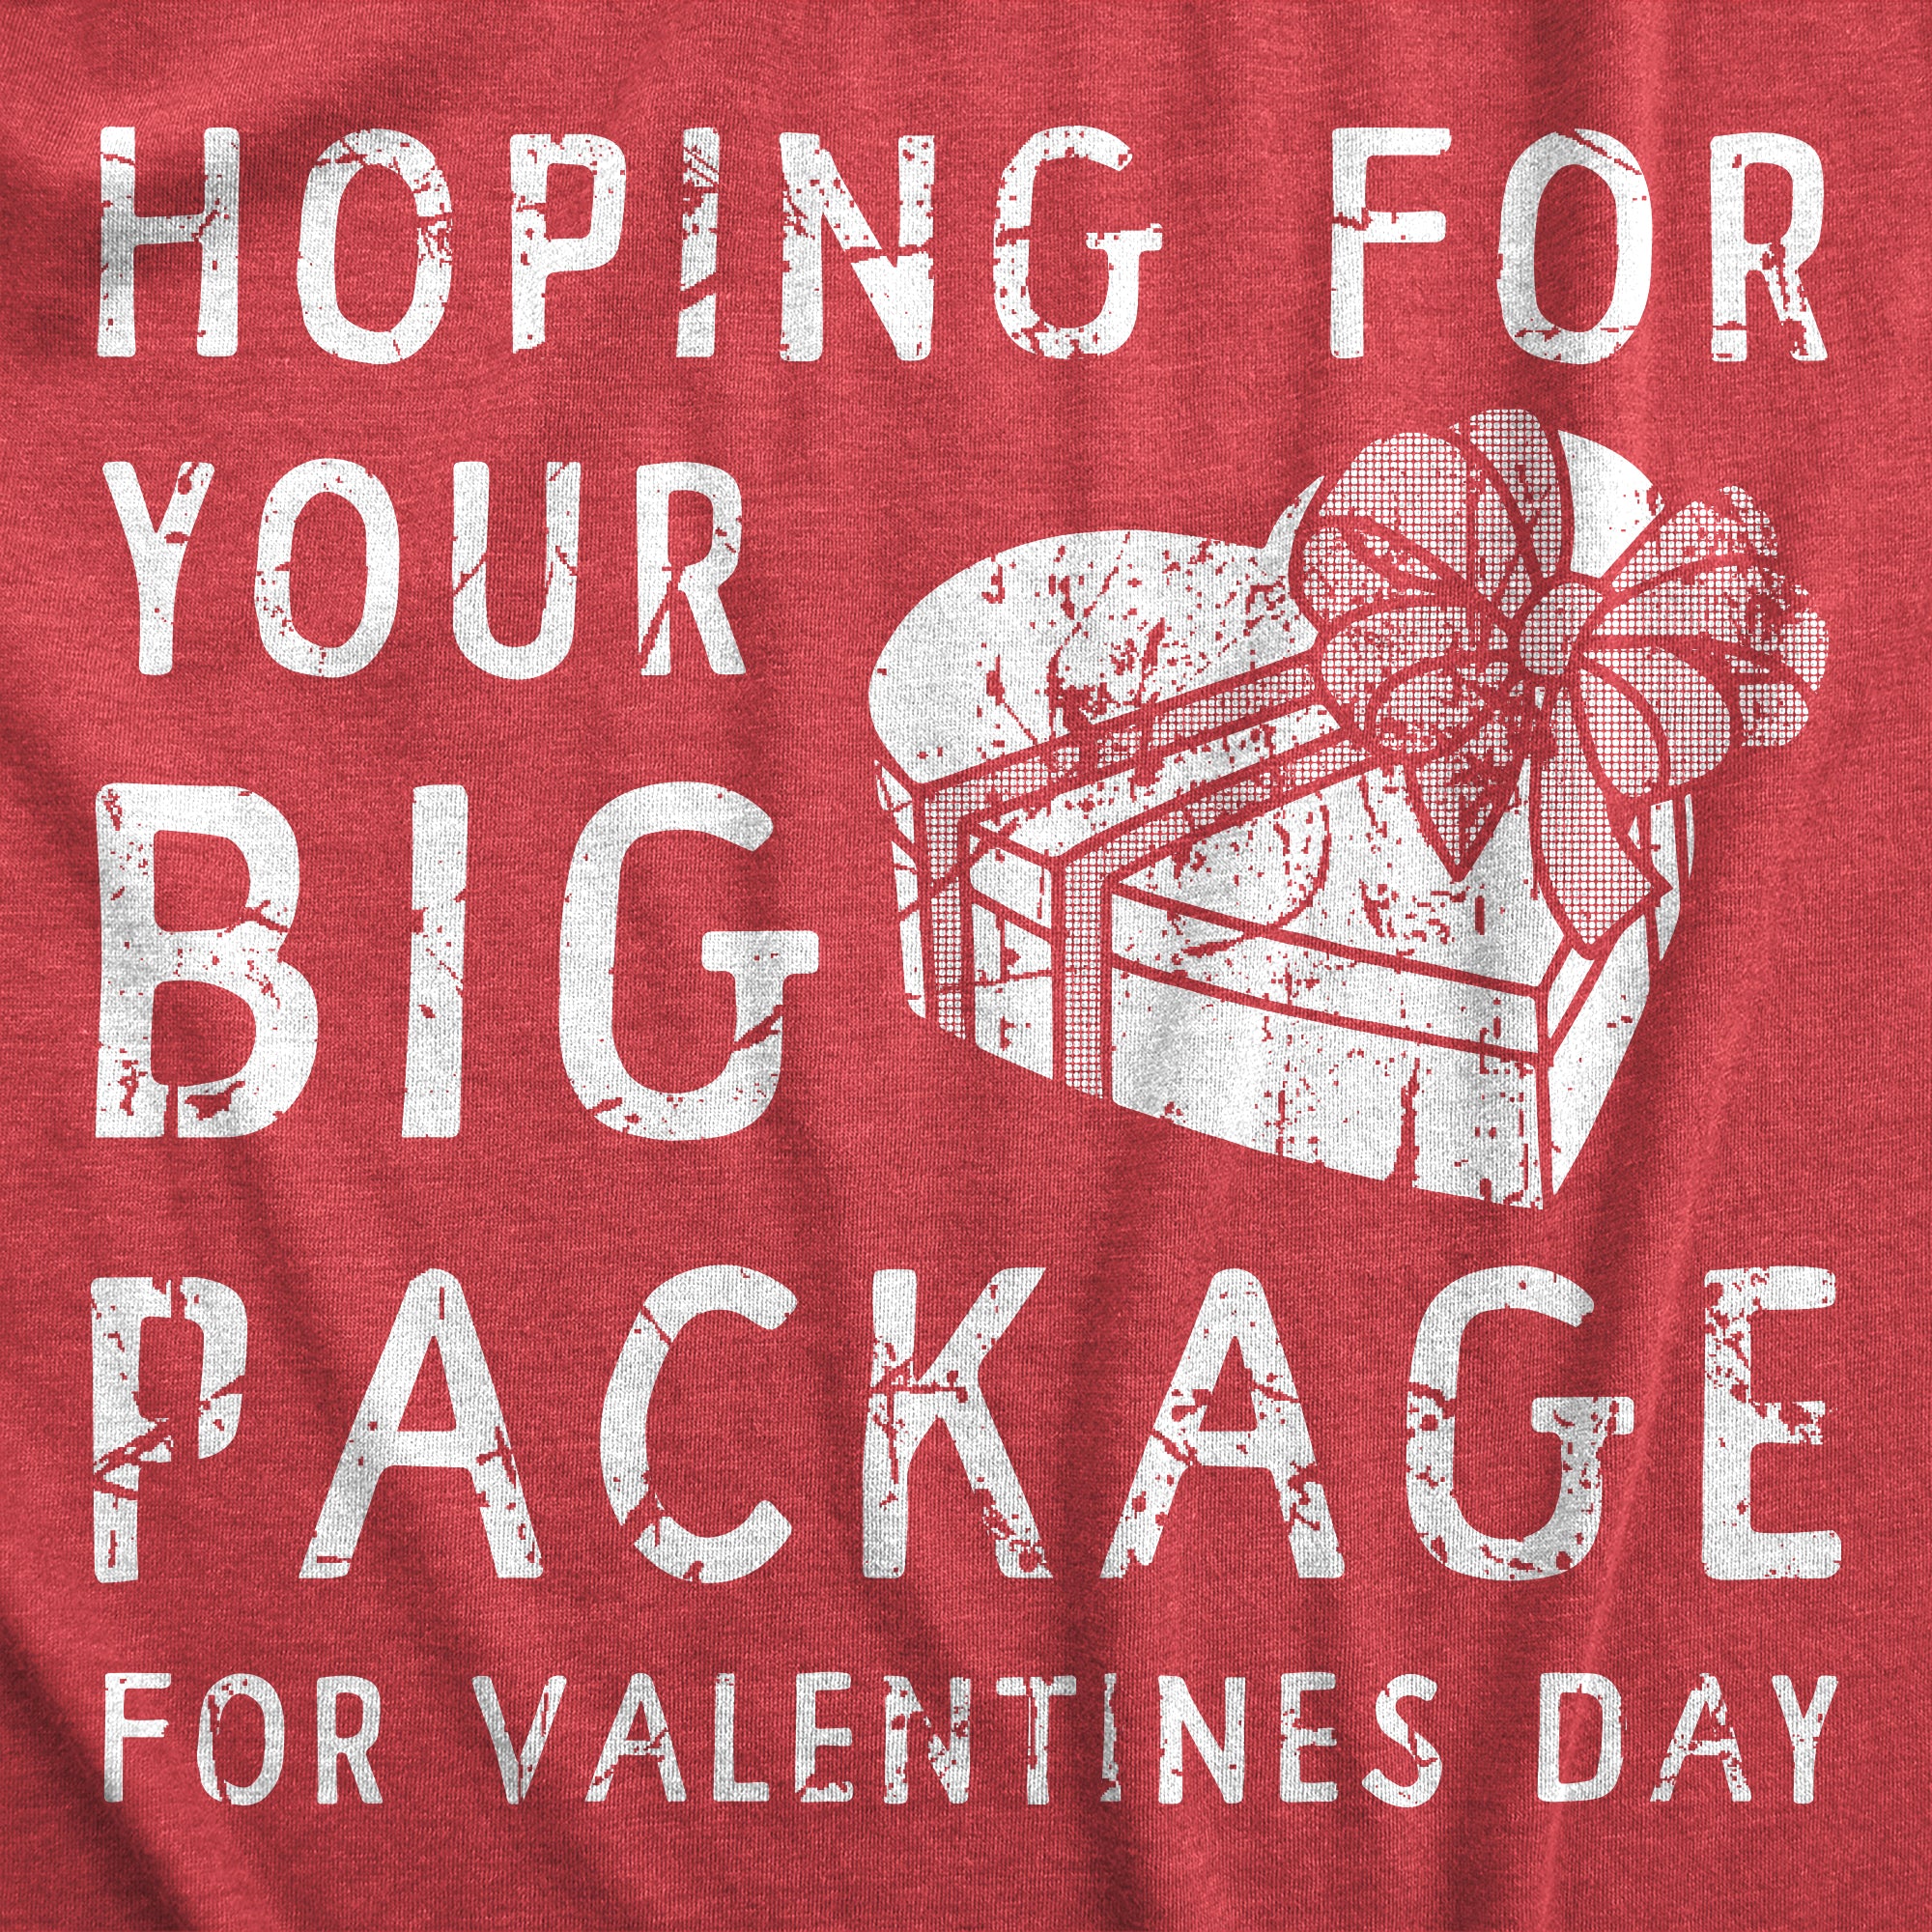 Funny Heather Red - PACKAGE Hoping For Your Big Package For Valinetines Day Womens T Shirt Nerdy Valentine's Day sex Tee